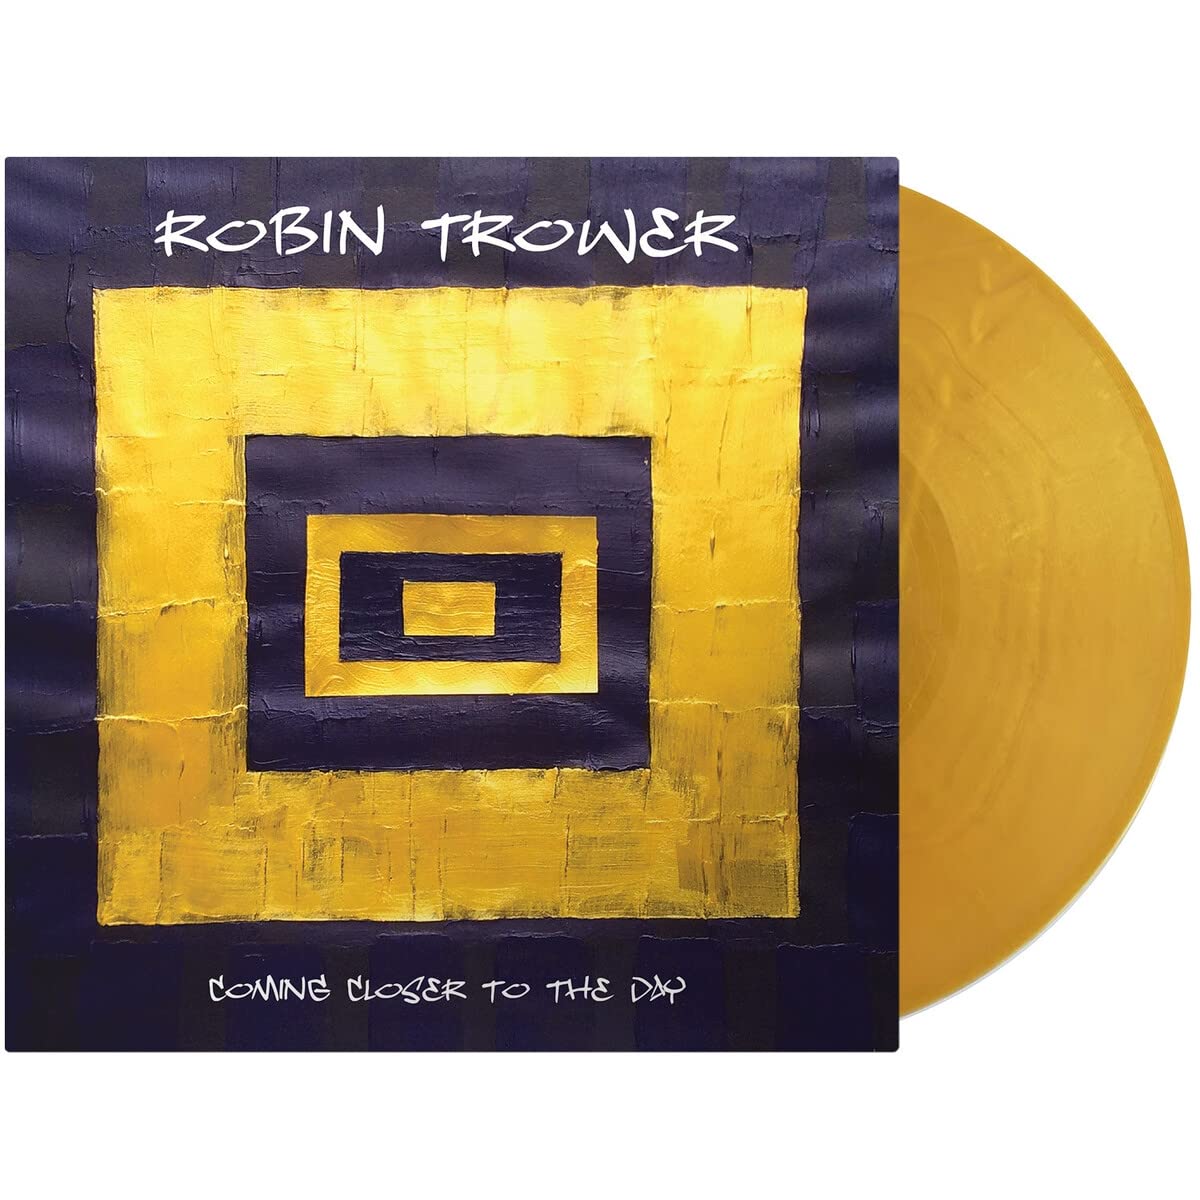 Robin Trower – Coming Closer To The Day